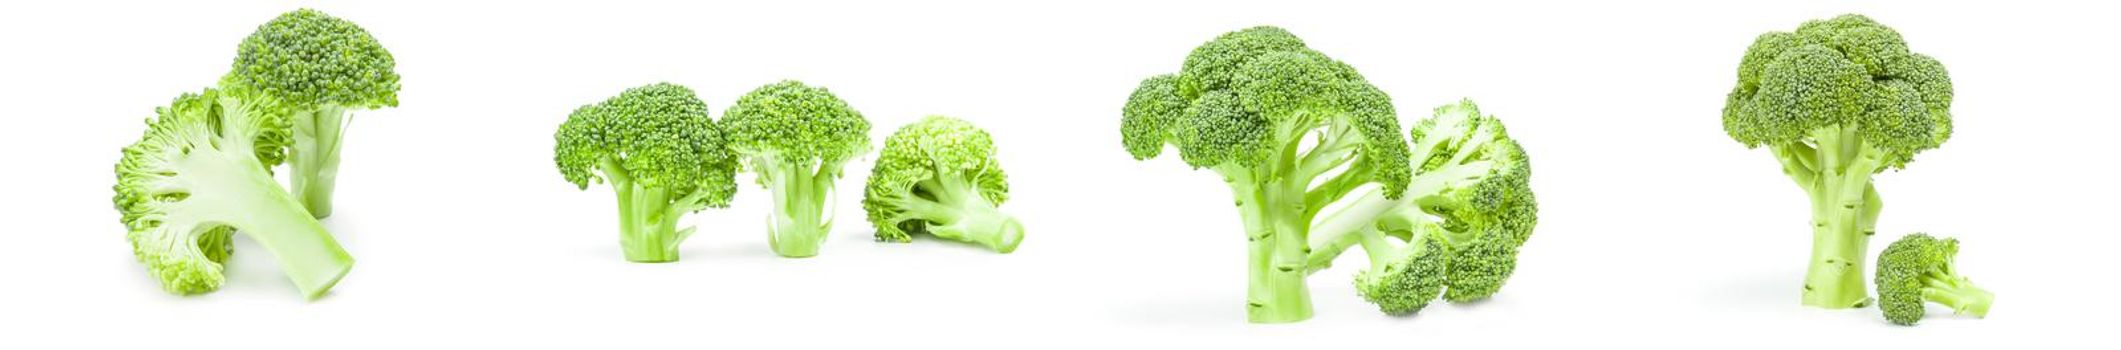 Collection of fresh head of broccoli isolated on a white background